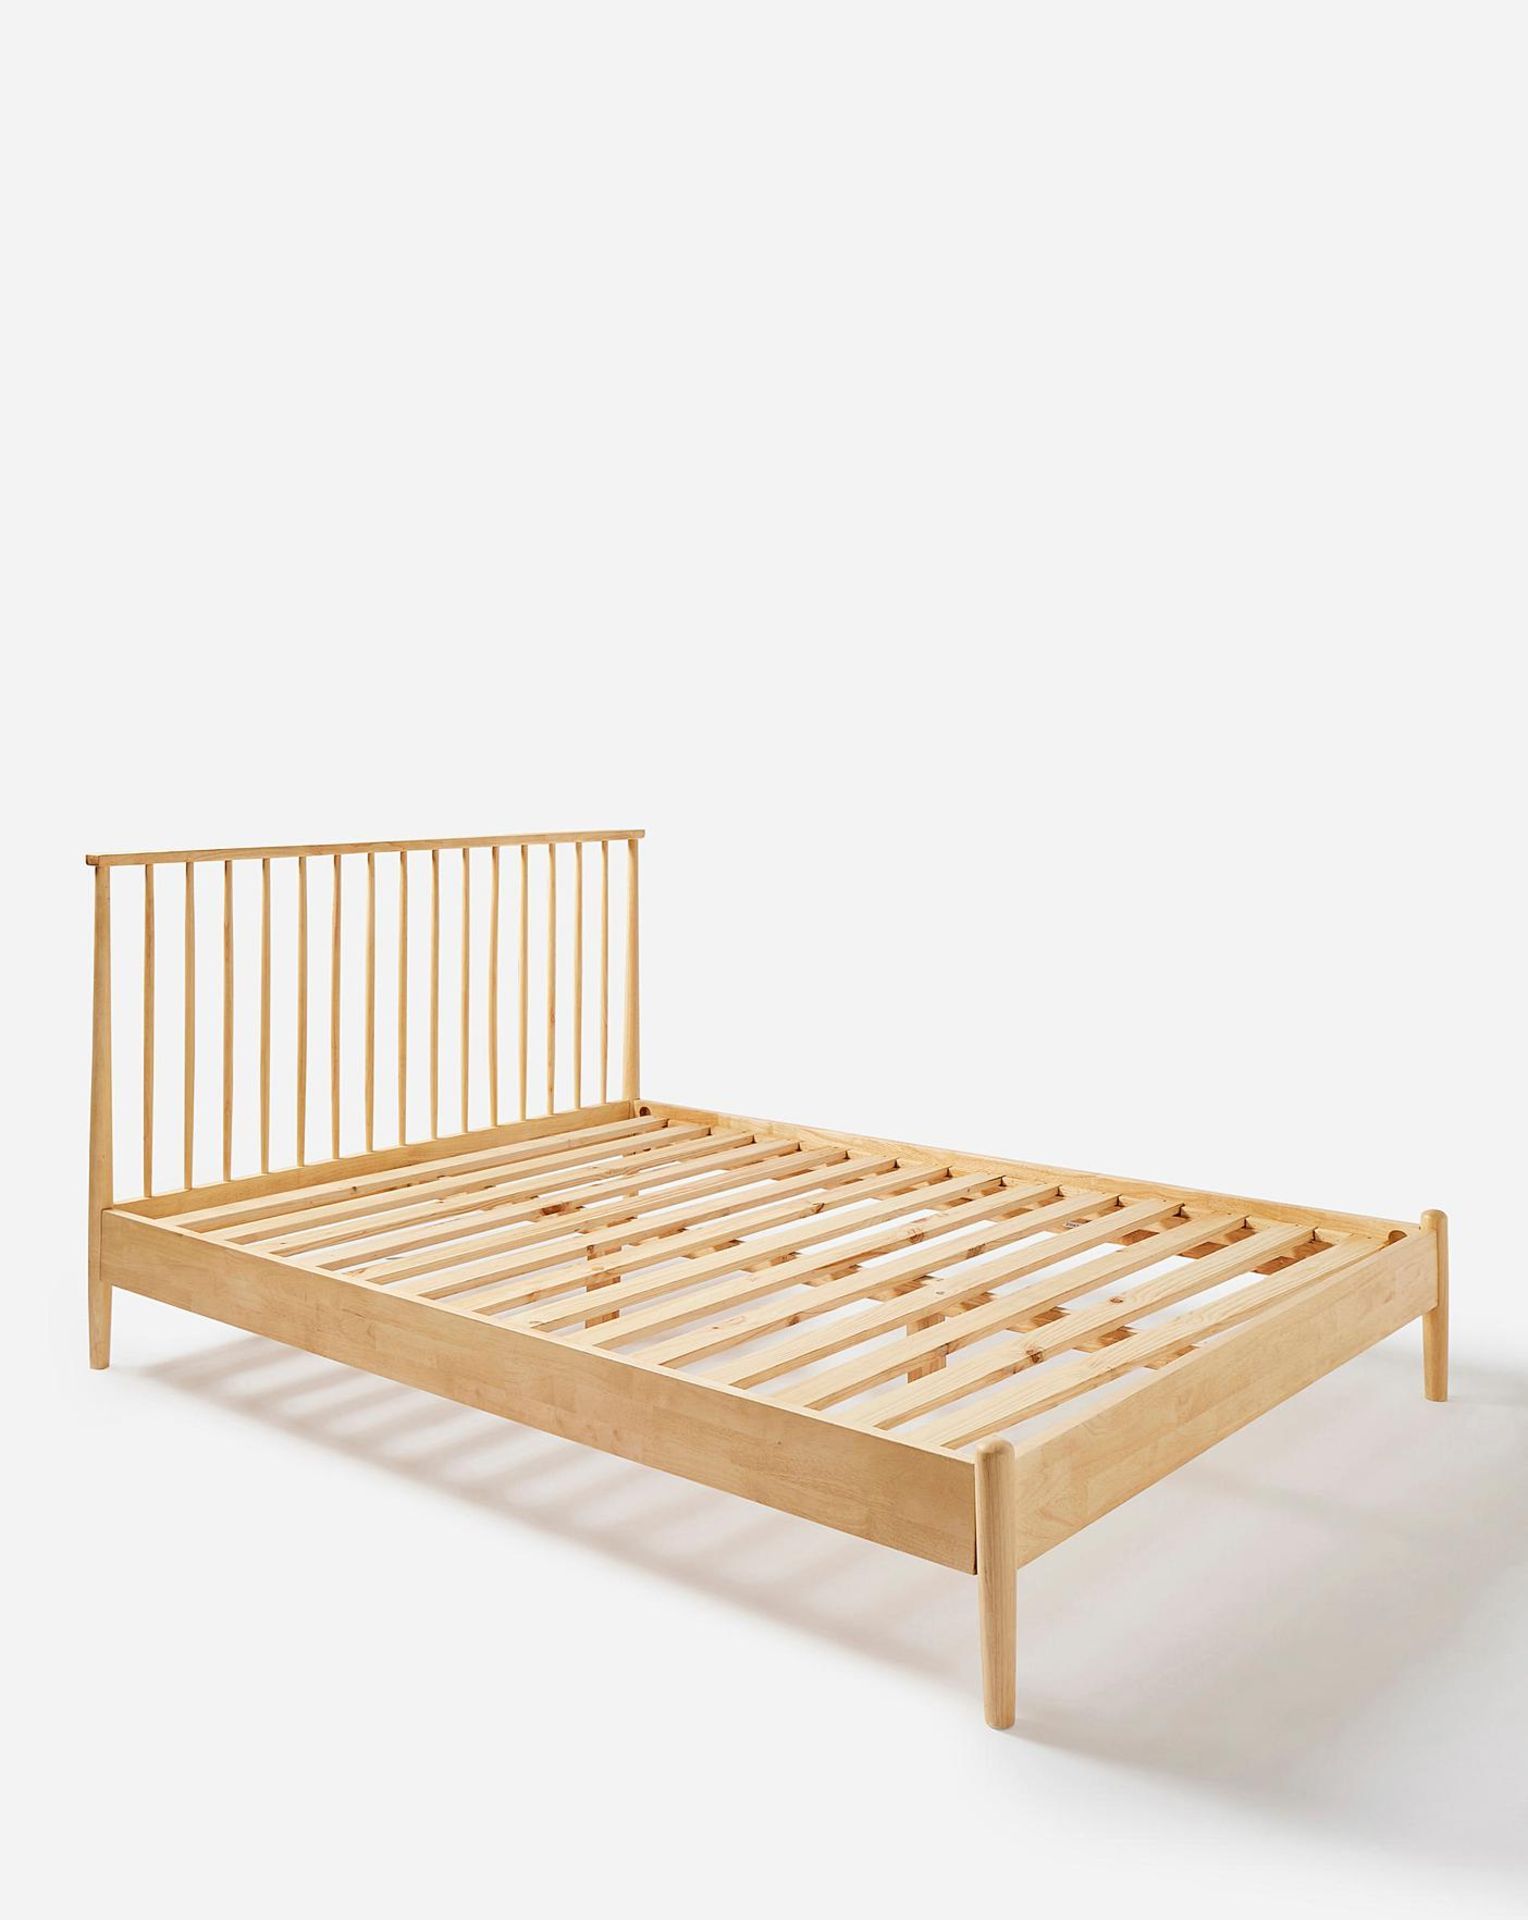 NEW & BOXED JULIPA Erika Wooden Spindle DOUBLE Bed Frame. LIGHT WOOD. RRP £649. EACH. Part of the - Image 3 of 3